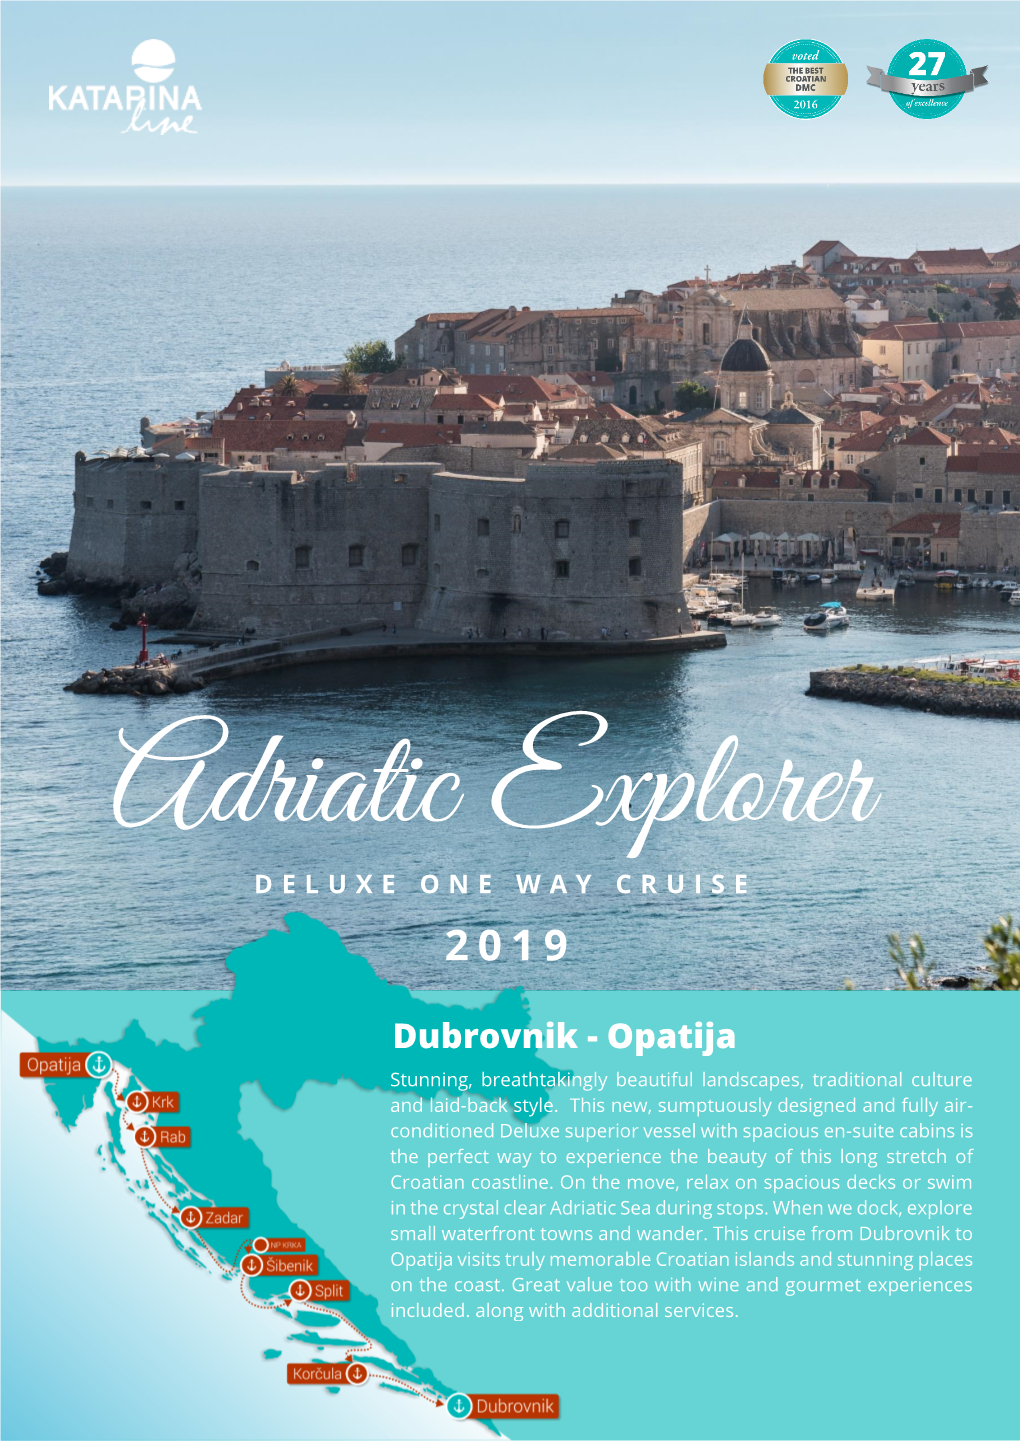 Dubrovnik - Opatija Stunning, Breathtakingly Beautiful Landscapes, Traditional Culture and Laid-Back Style